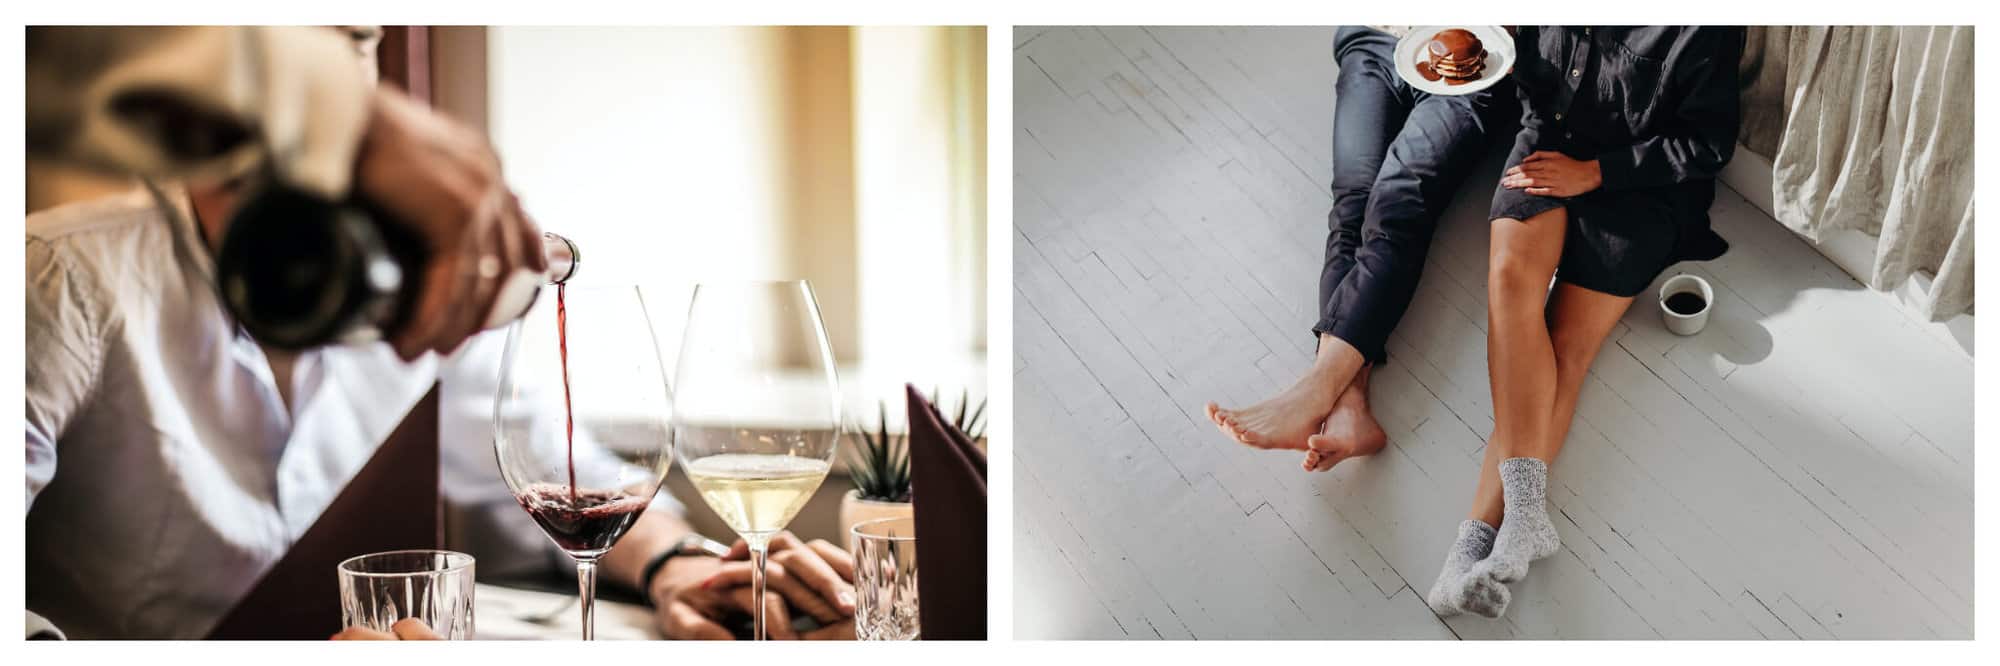 Left: A woman pours a man a red wine beside her glass of white wine. Right: A man and a woman, both wearing gray, are sitting on their bedroom floor for breakfast.